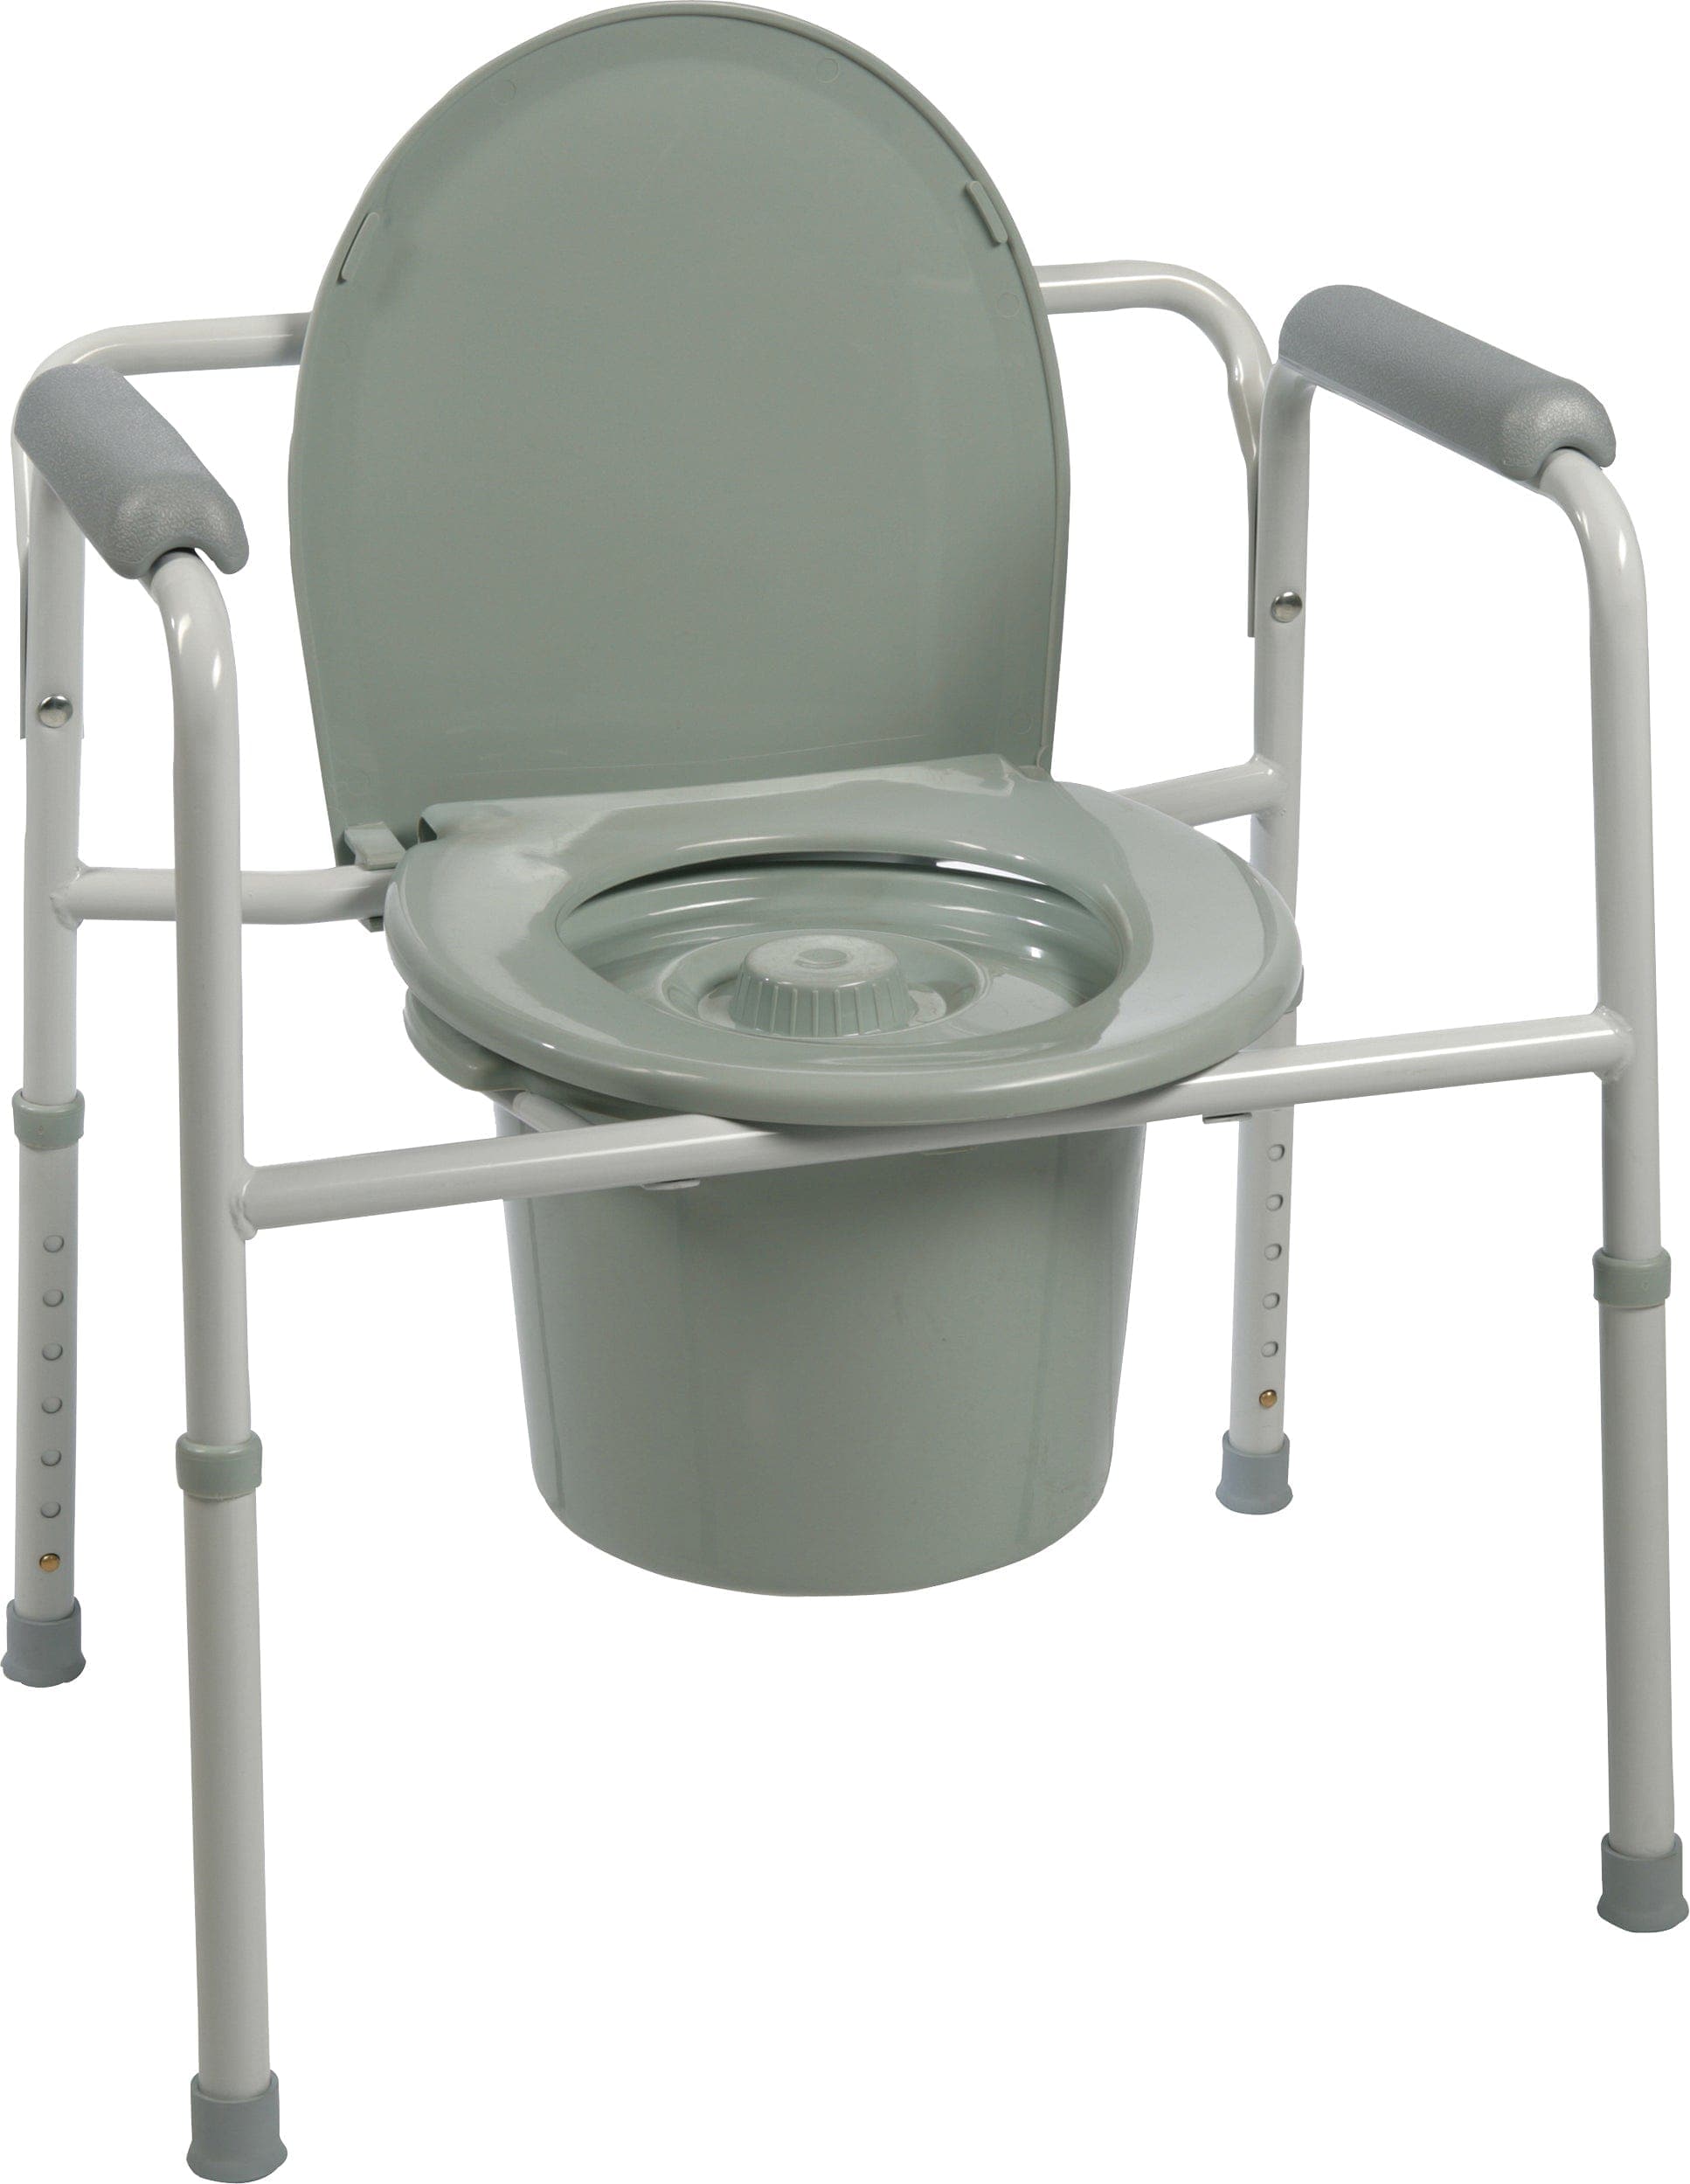 Compass Health Commodes Compass Health ProBasics Three-in-One Steel Commode with Plastic Armrests